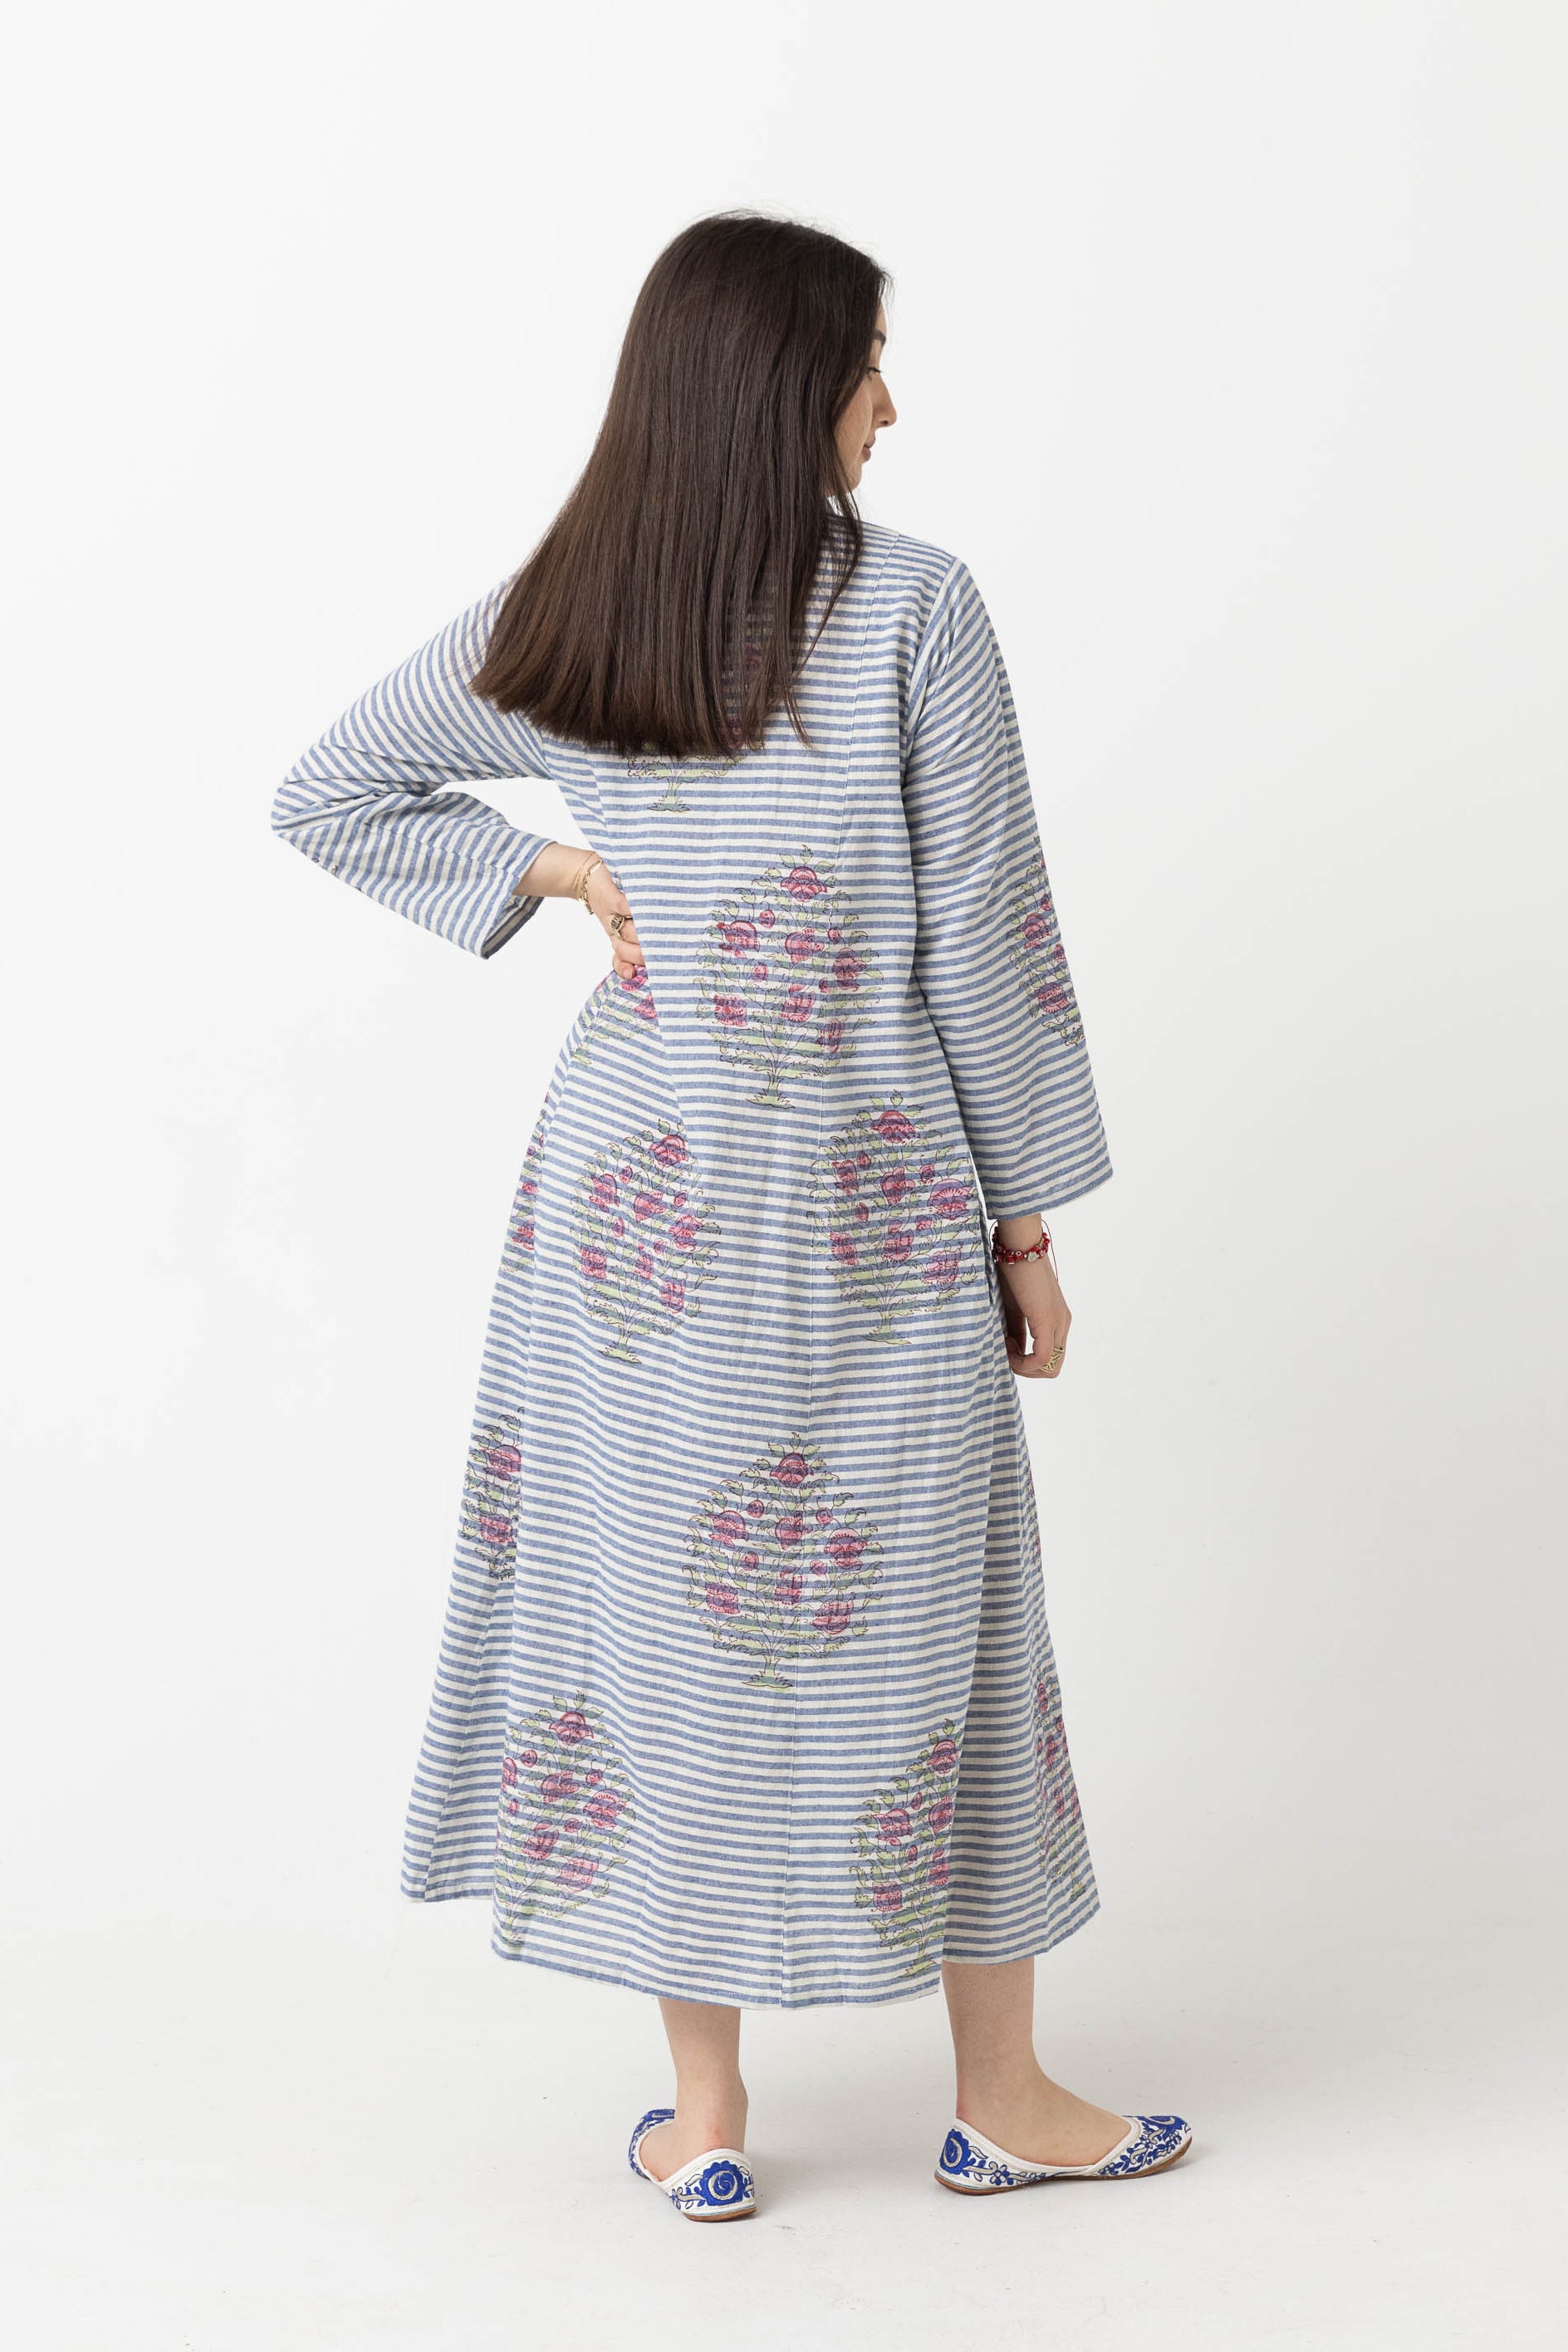 Handwoven Block Print Kaftan:  Blue & White Stripe with Pink Floral (S)